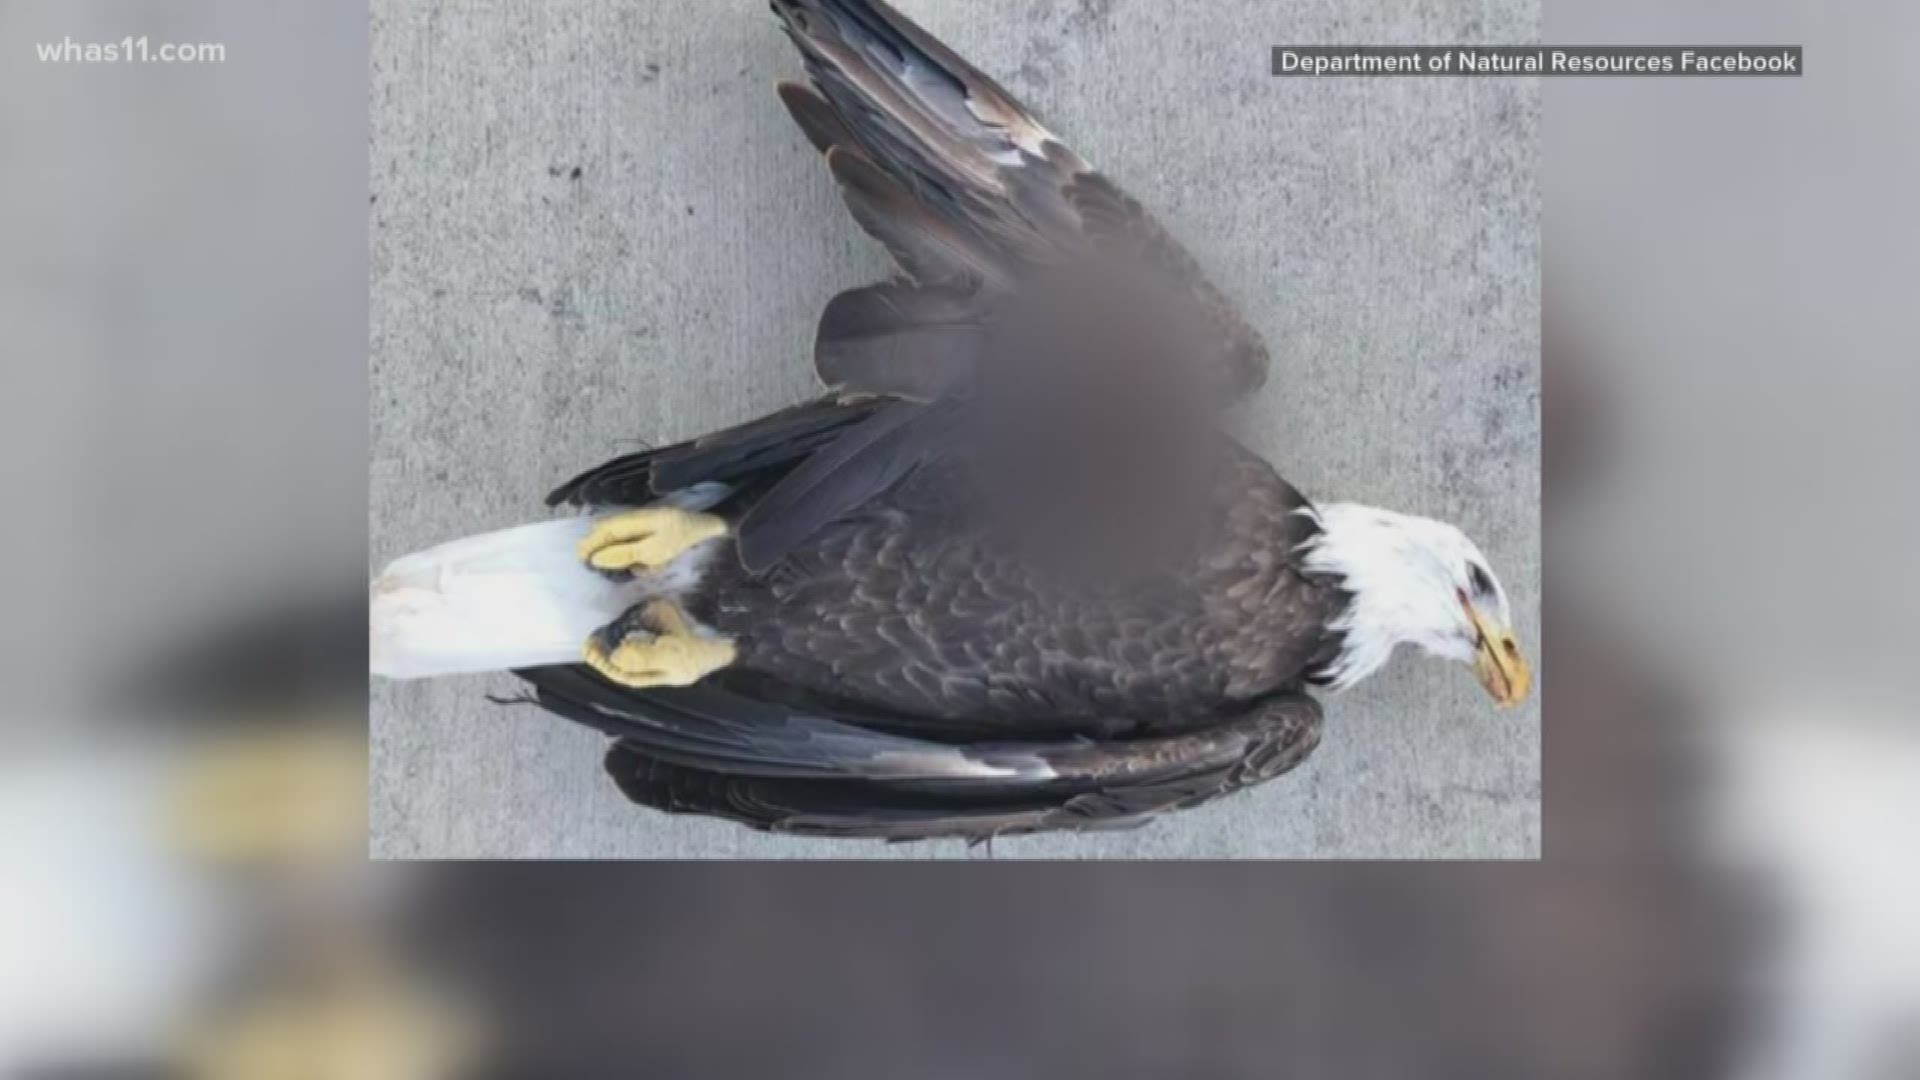 The Indiana Department of Natural Resources says the eagle was found alive suffering from a gunshot wound.